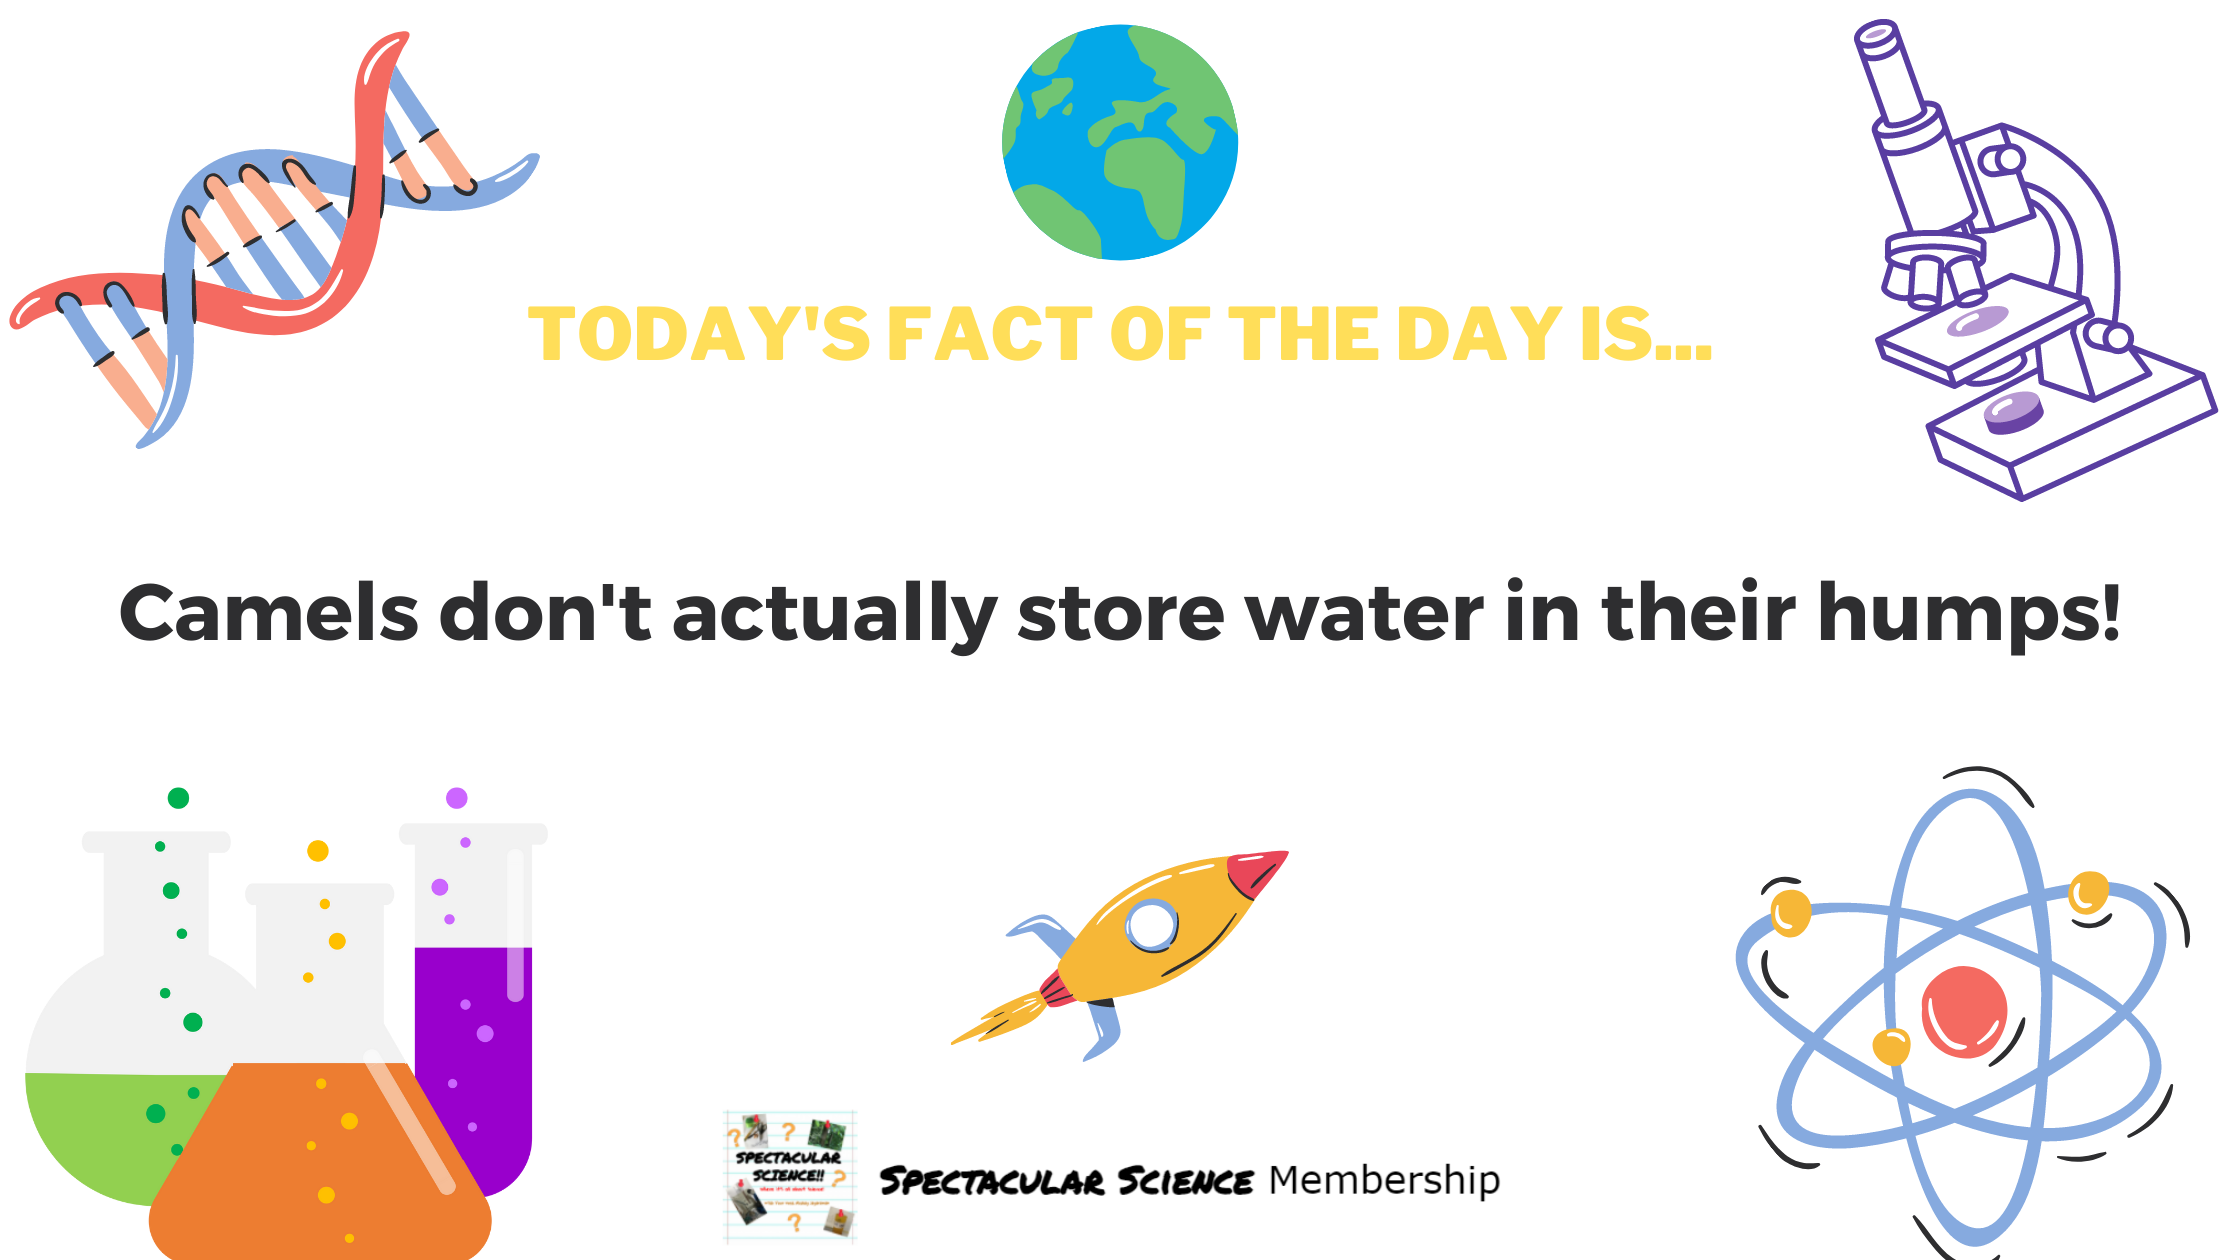 Fact of the Day Image Feb. 20th